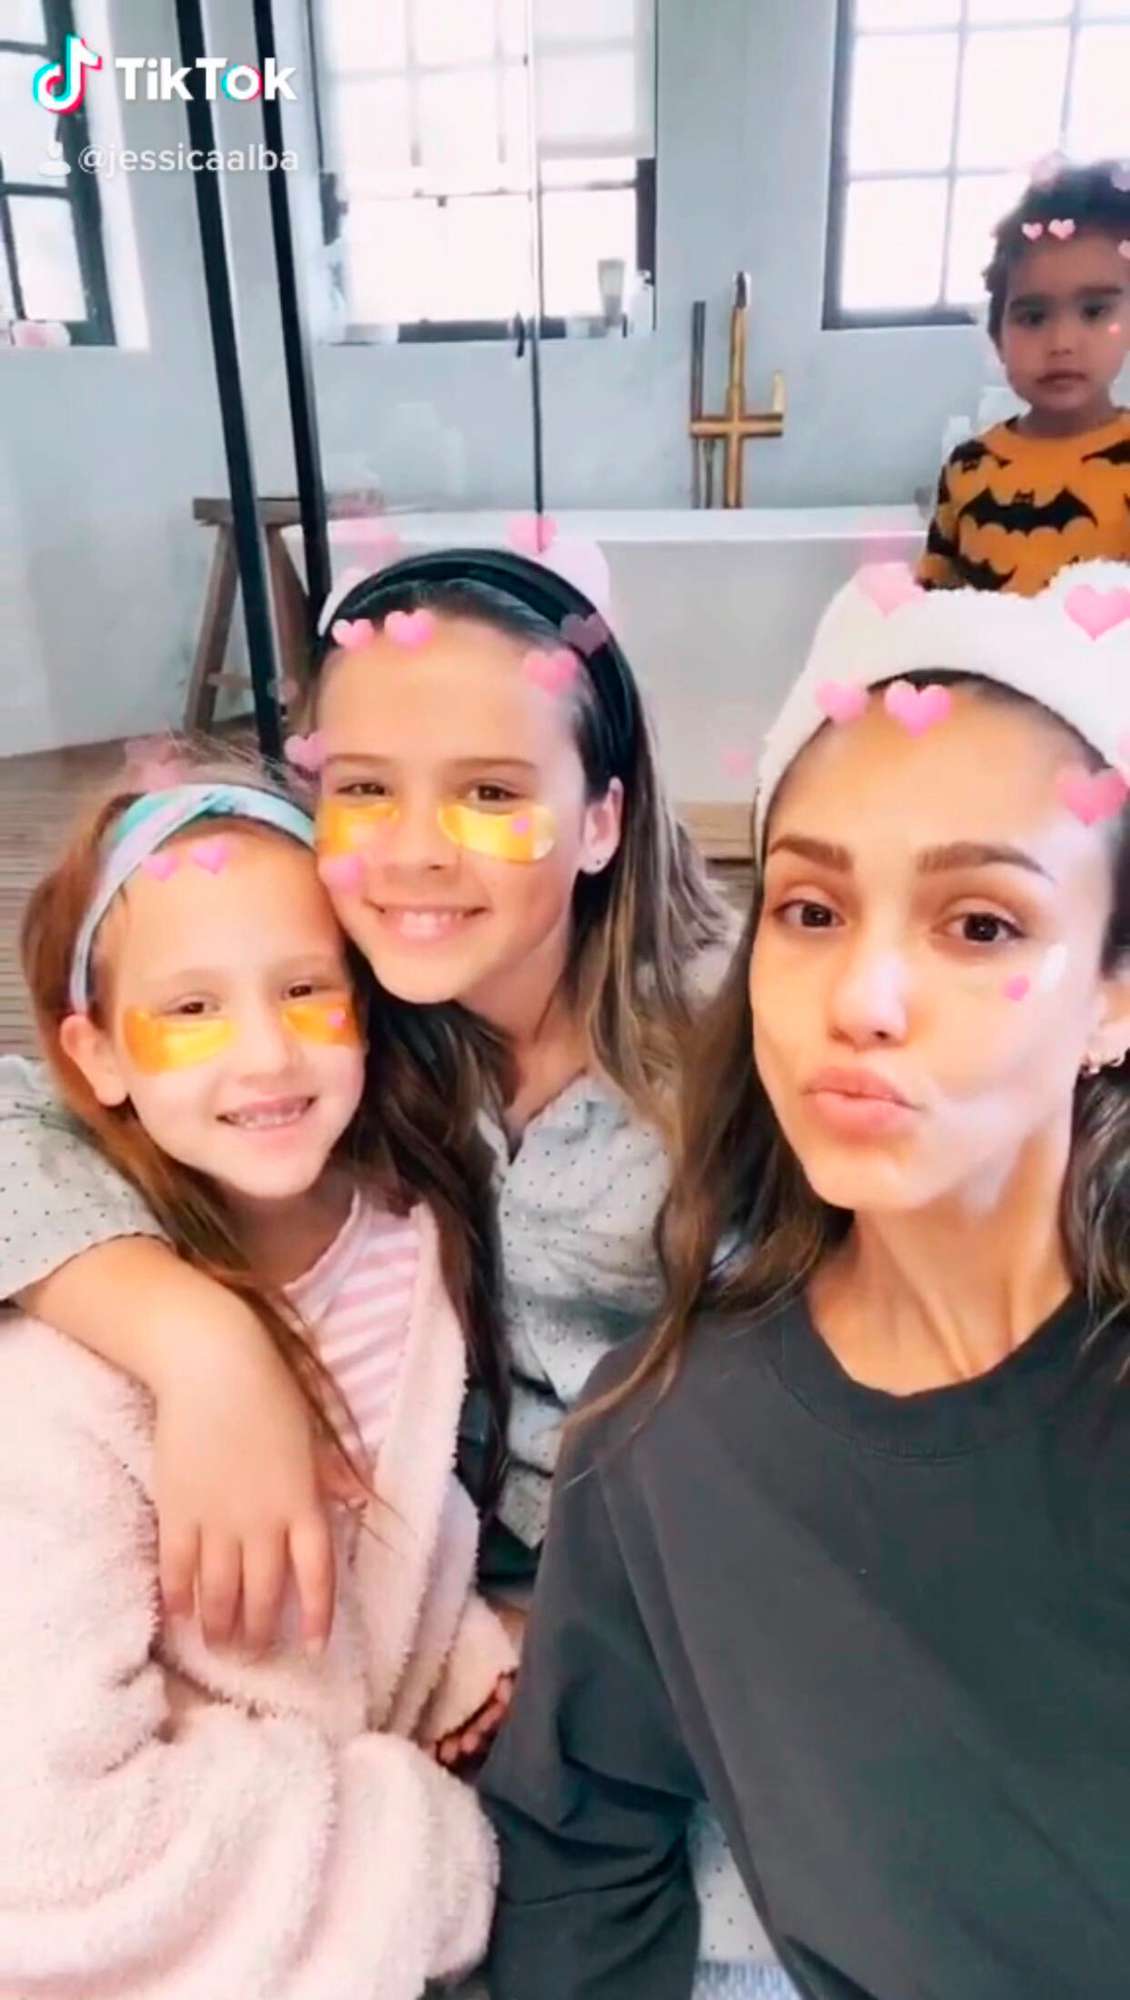 Jessica Alba Says She Joined Tiktok To Bond With Her Kids People Com Hayes alba warren's birthday is december 31. people com